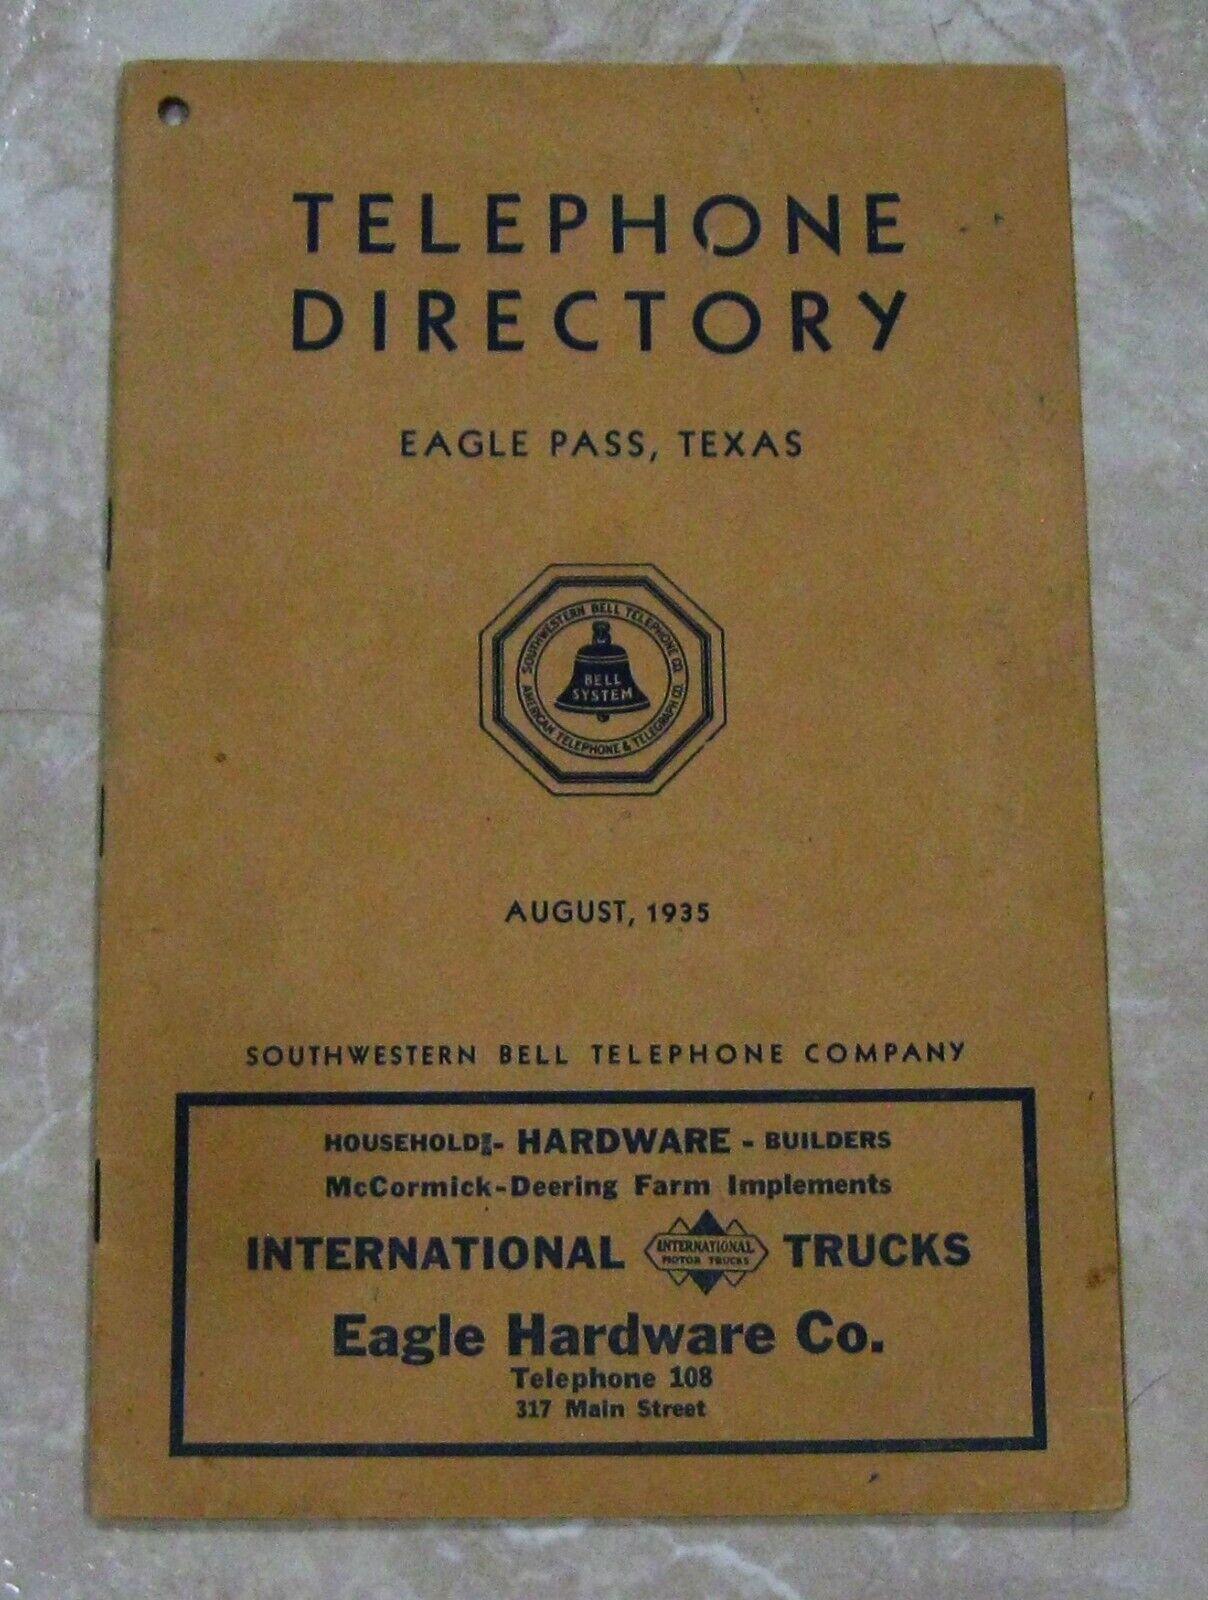 Eagle Pass Texas August 1935 Telephone Directory